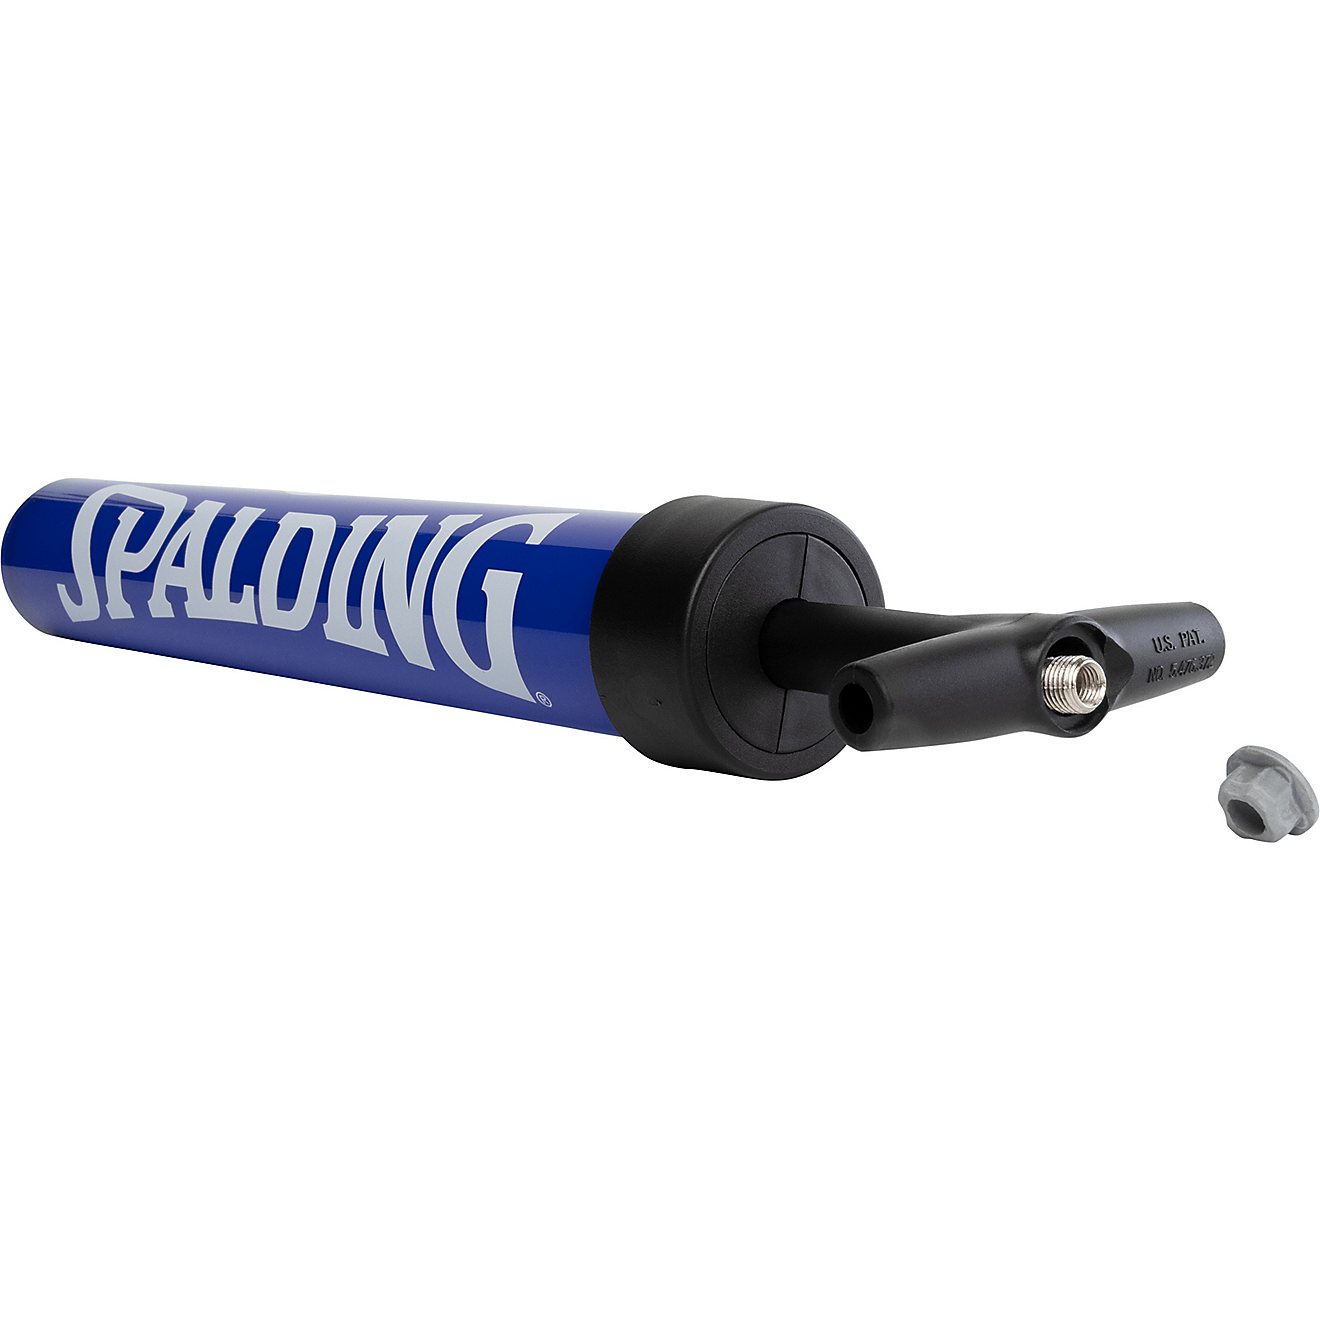 Spalding Sports Championship Ball Pump Nwwip 12" for sale online